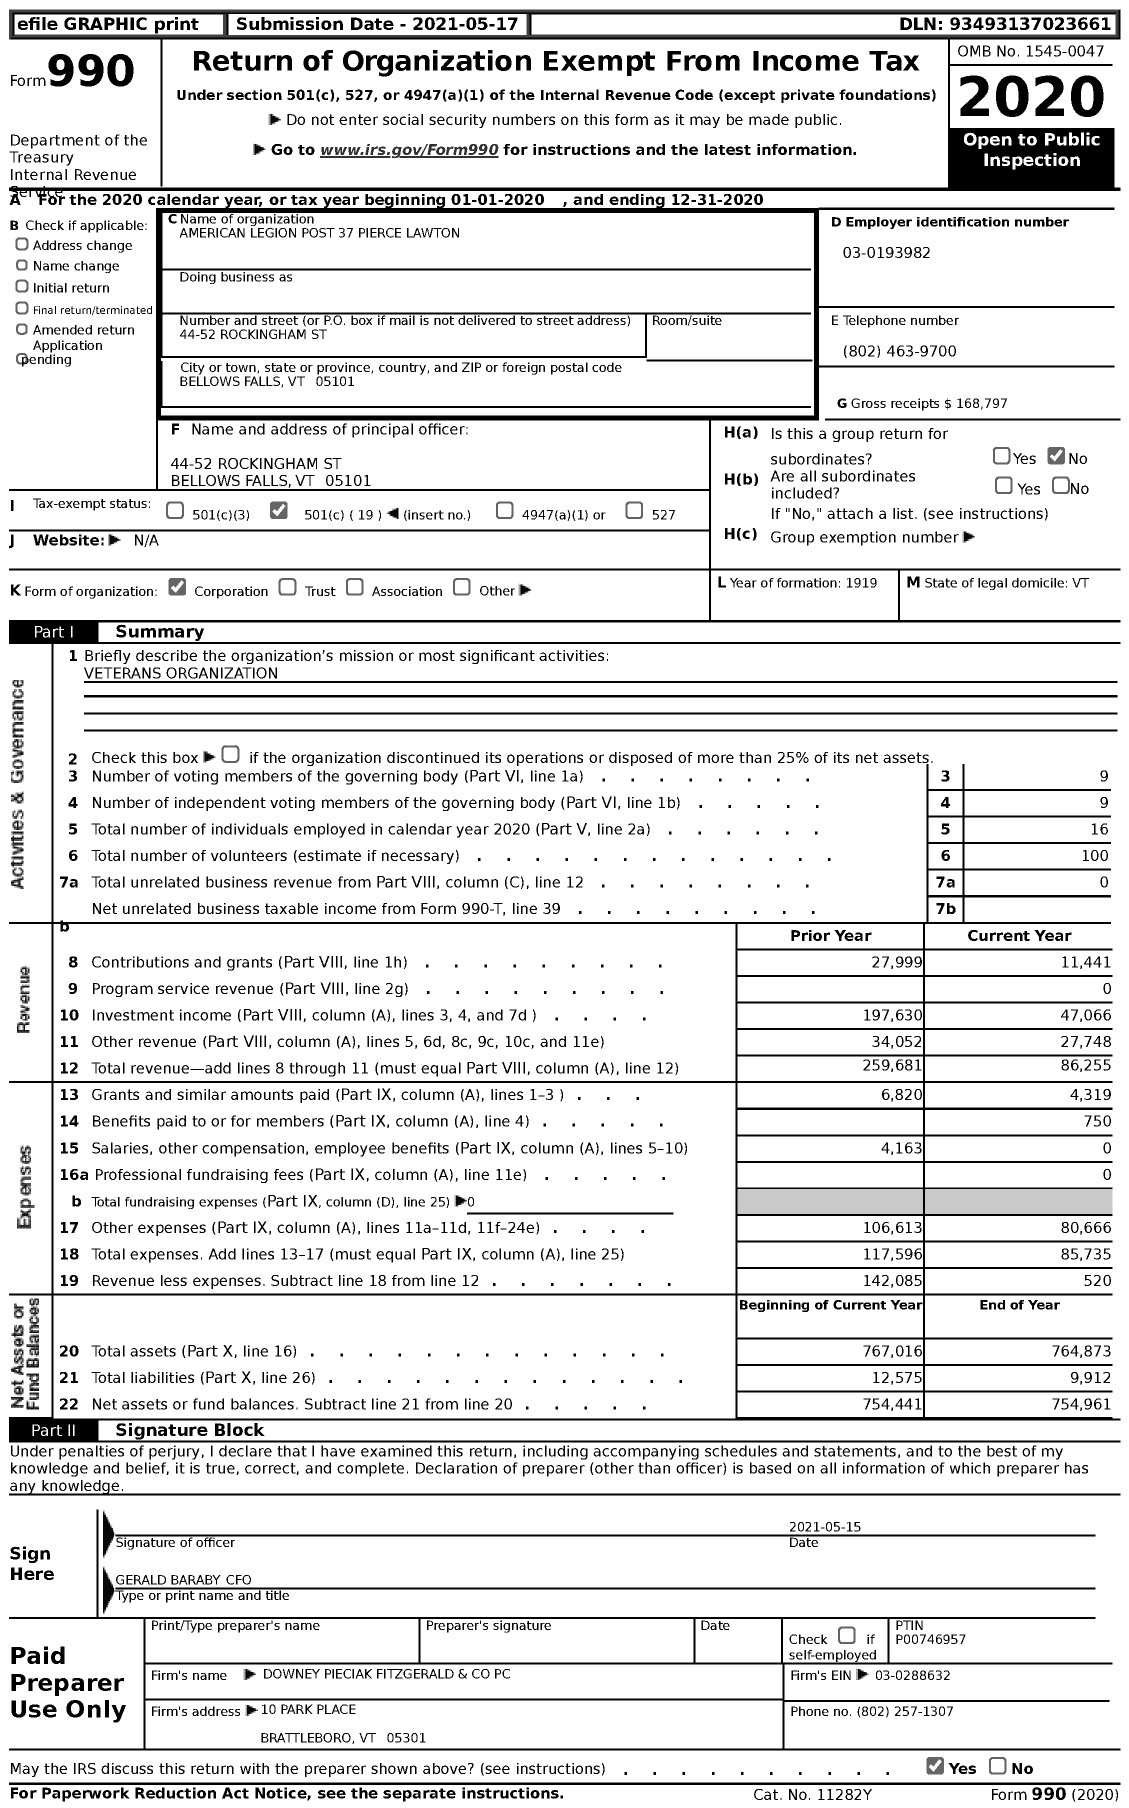 Image of first page of 2020 Form 990 for American Legion - 0037 Pierce Lawton